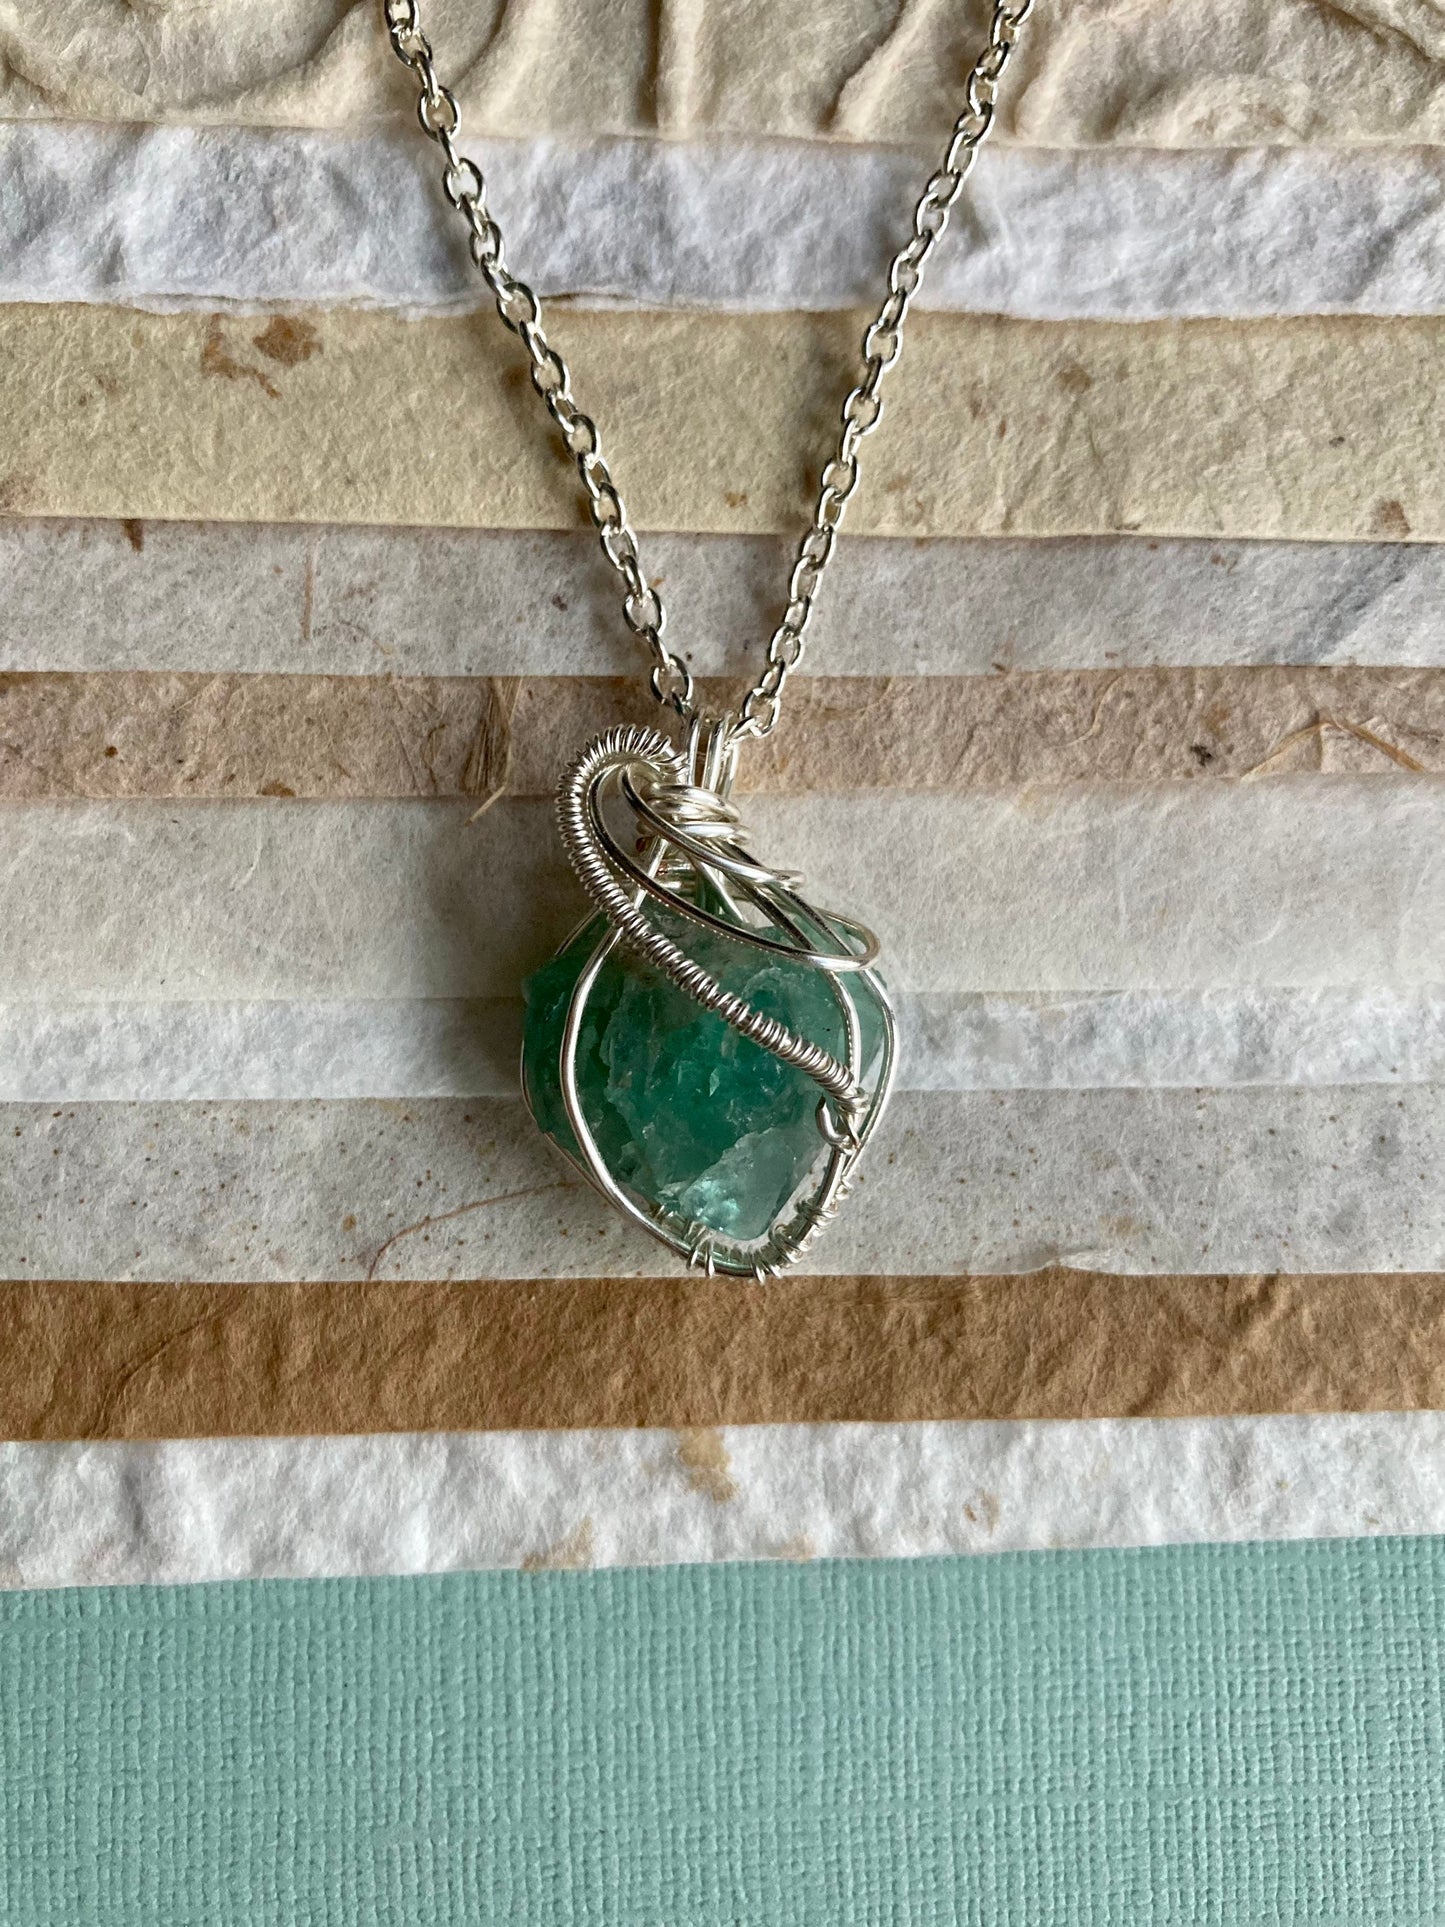 Green fluorite pendant handmade necklace wire wrapped natural stone with 18 inch length chain